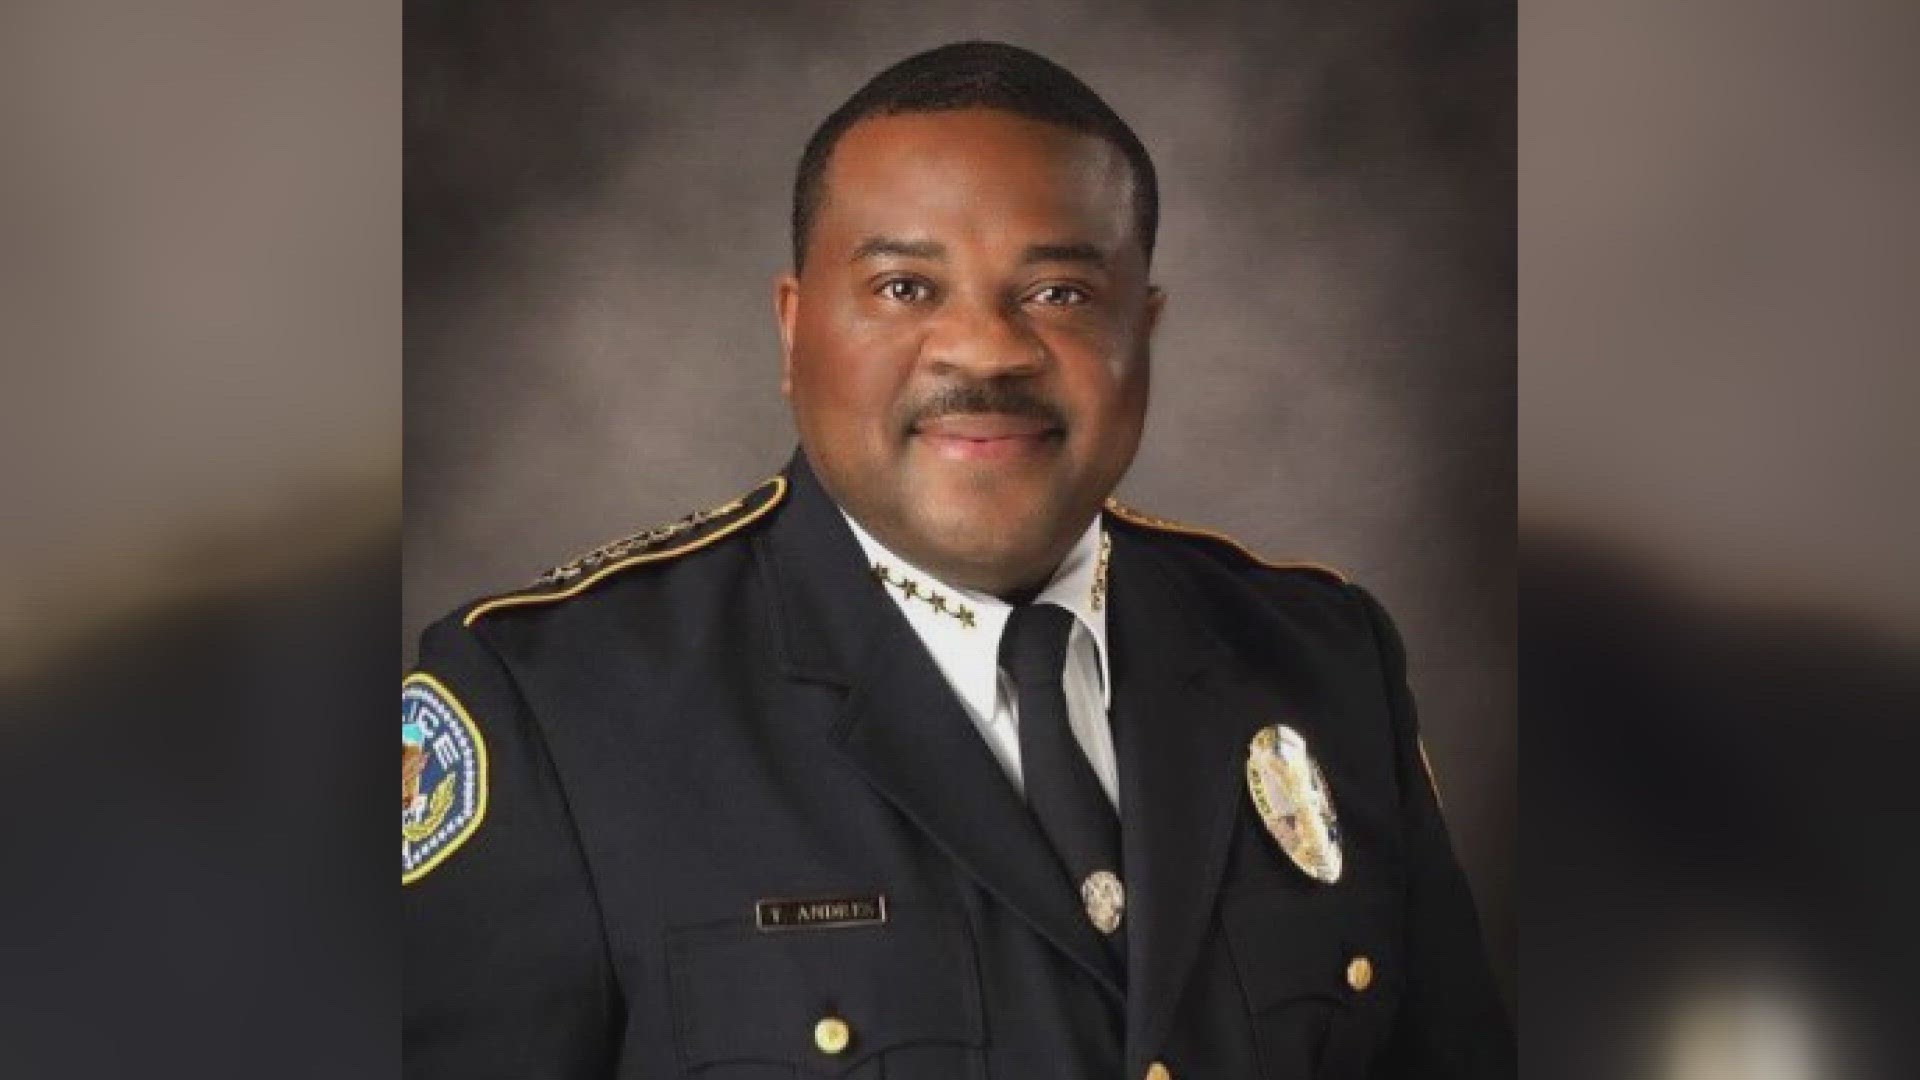 There are 3 finalists for the superintendent of police job at the NOPD.